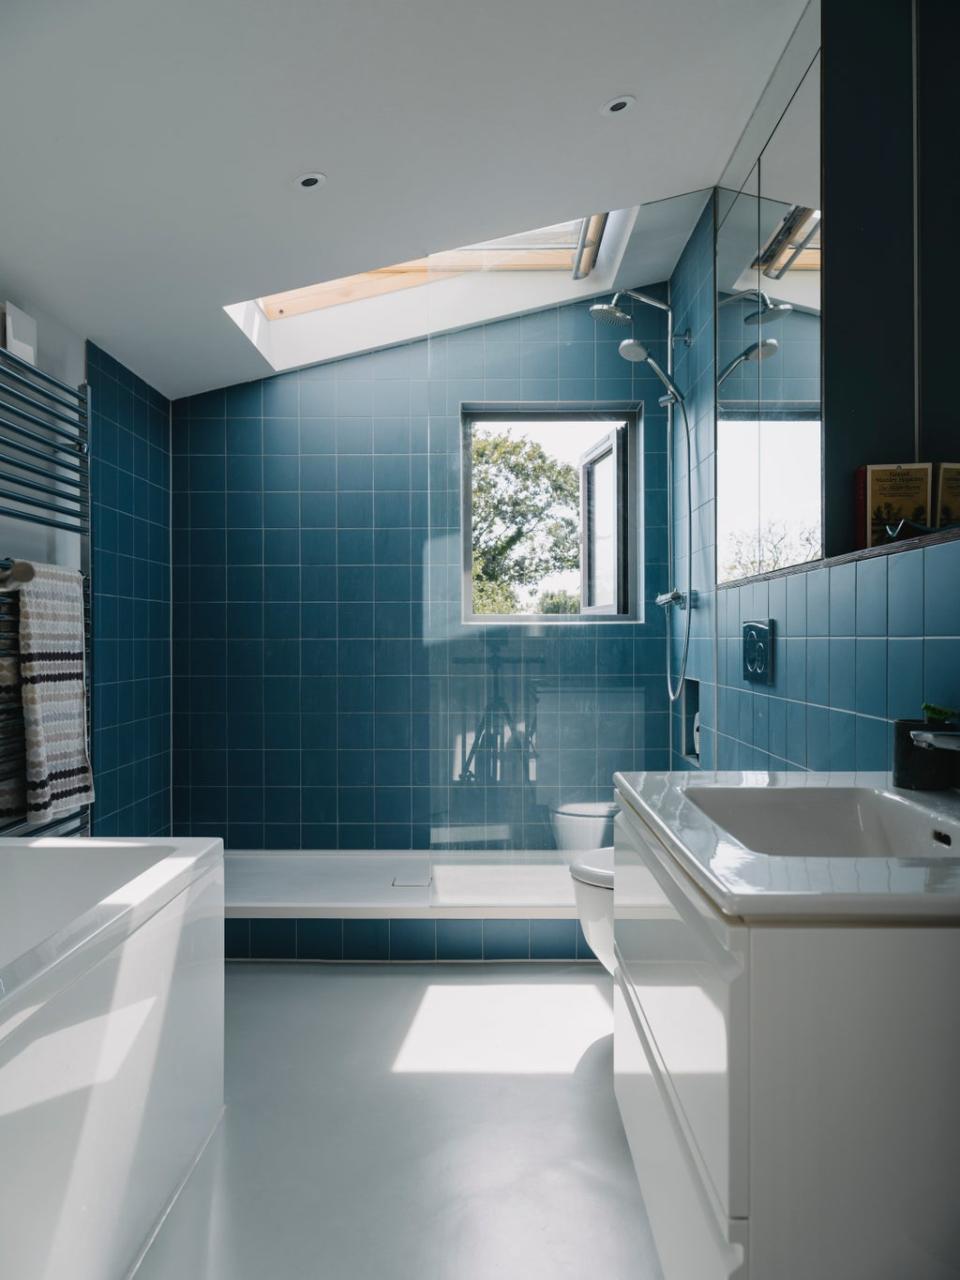 A new upstairs bathroom with skylight  was added above the back bedroom in a subtle structural reorganisation that did not require the hassle of a full planning application (Tim Crocker)